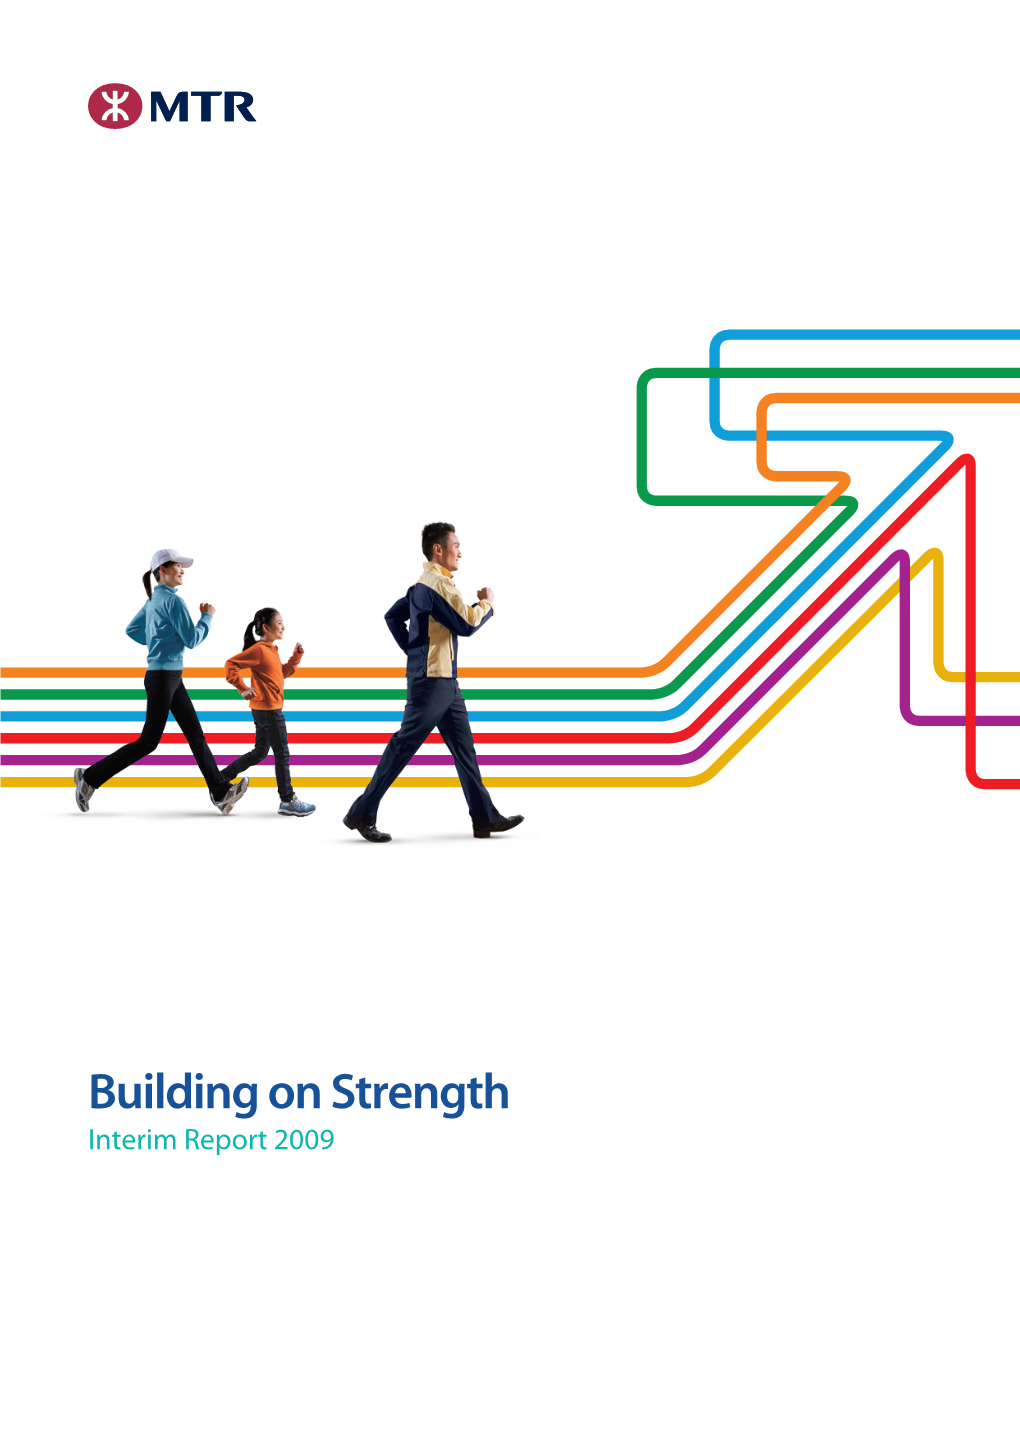 Building on Strength Interim Report 2009 Vision We Aim to Be a Globally Recognised Leader That Connects and Grows Communities with Caring Service